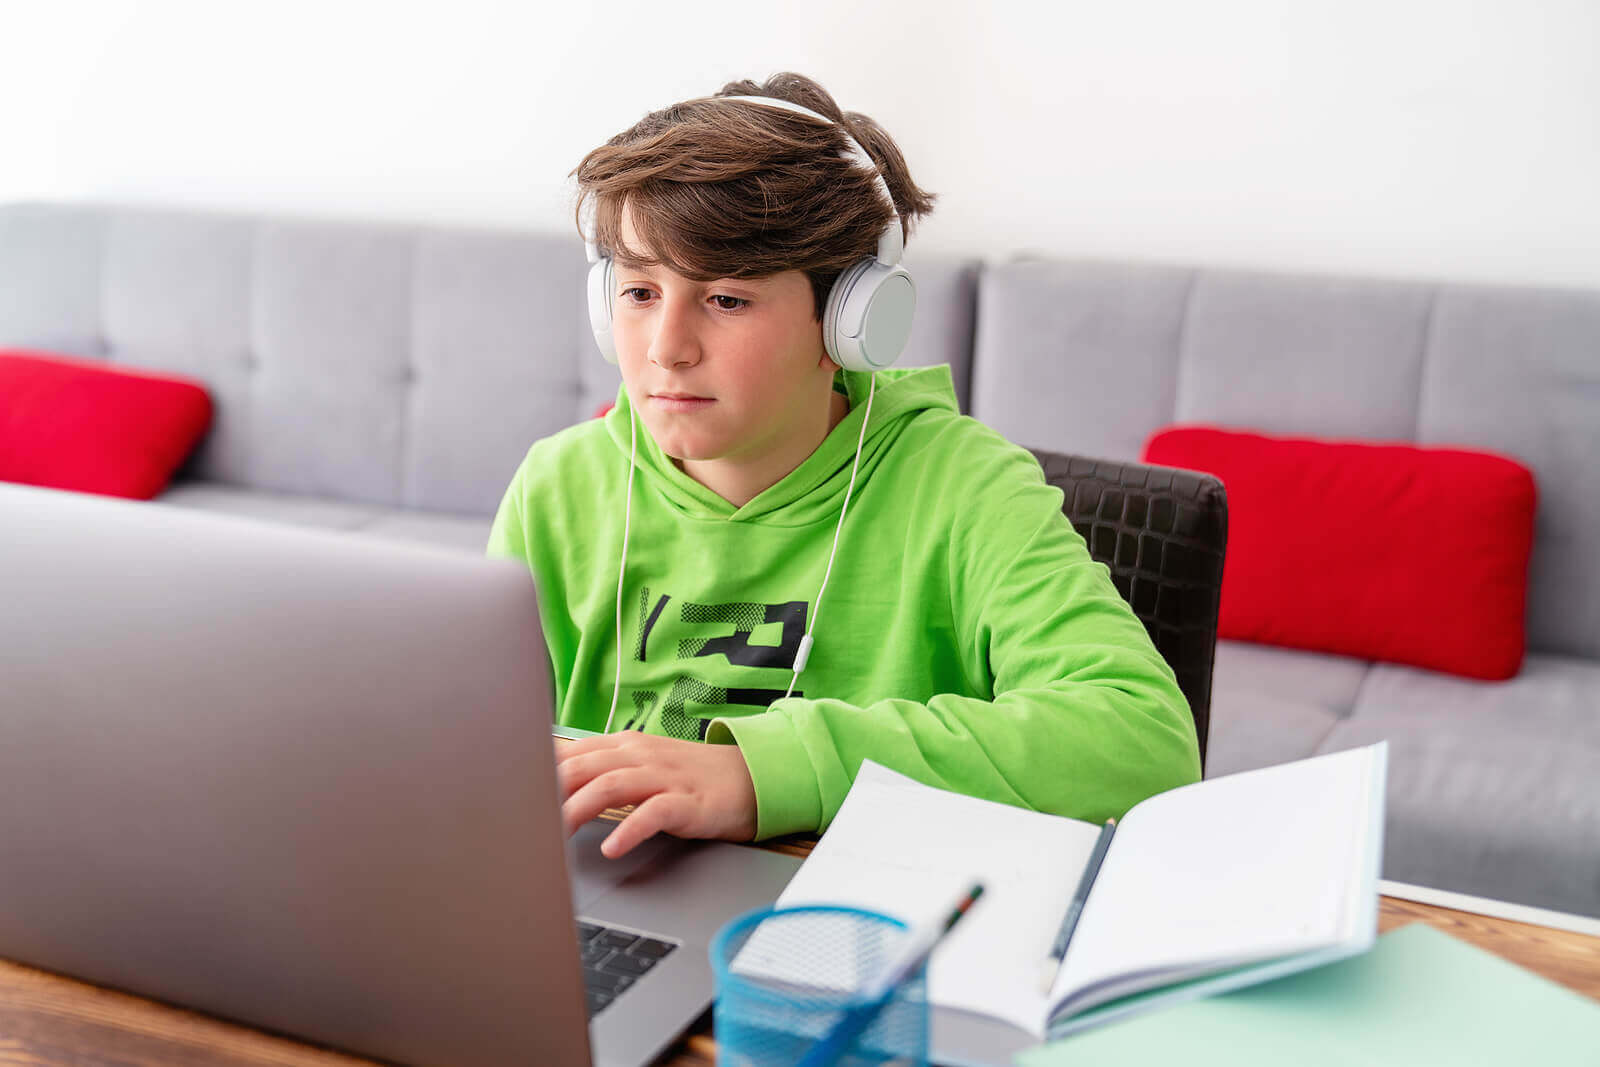 6 Tactics to Encourage Children to Study at Home